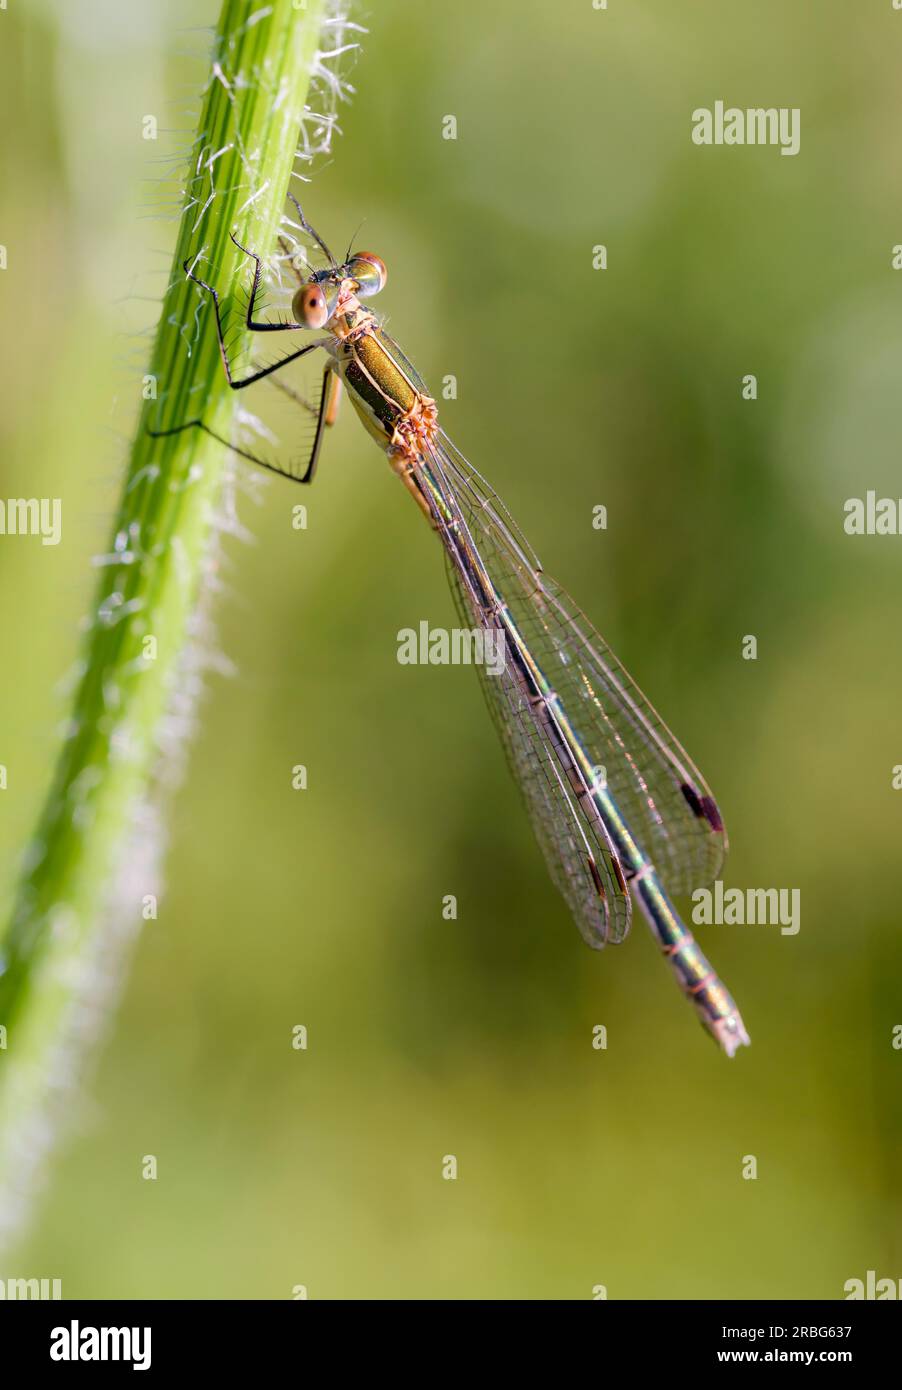 Female of a damselfly called, also known as emerald damselfly (Lestes ...